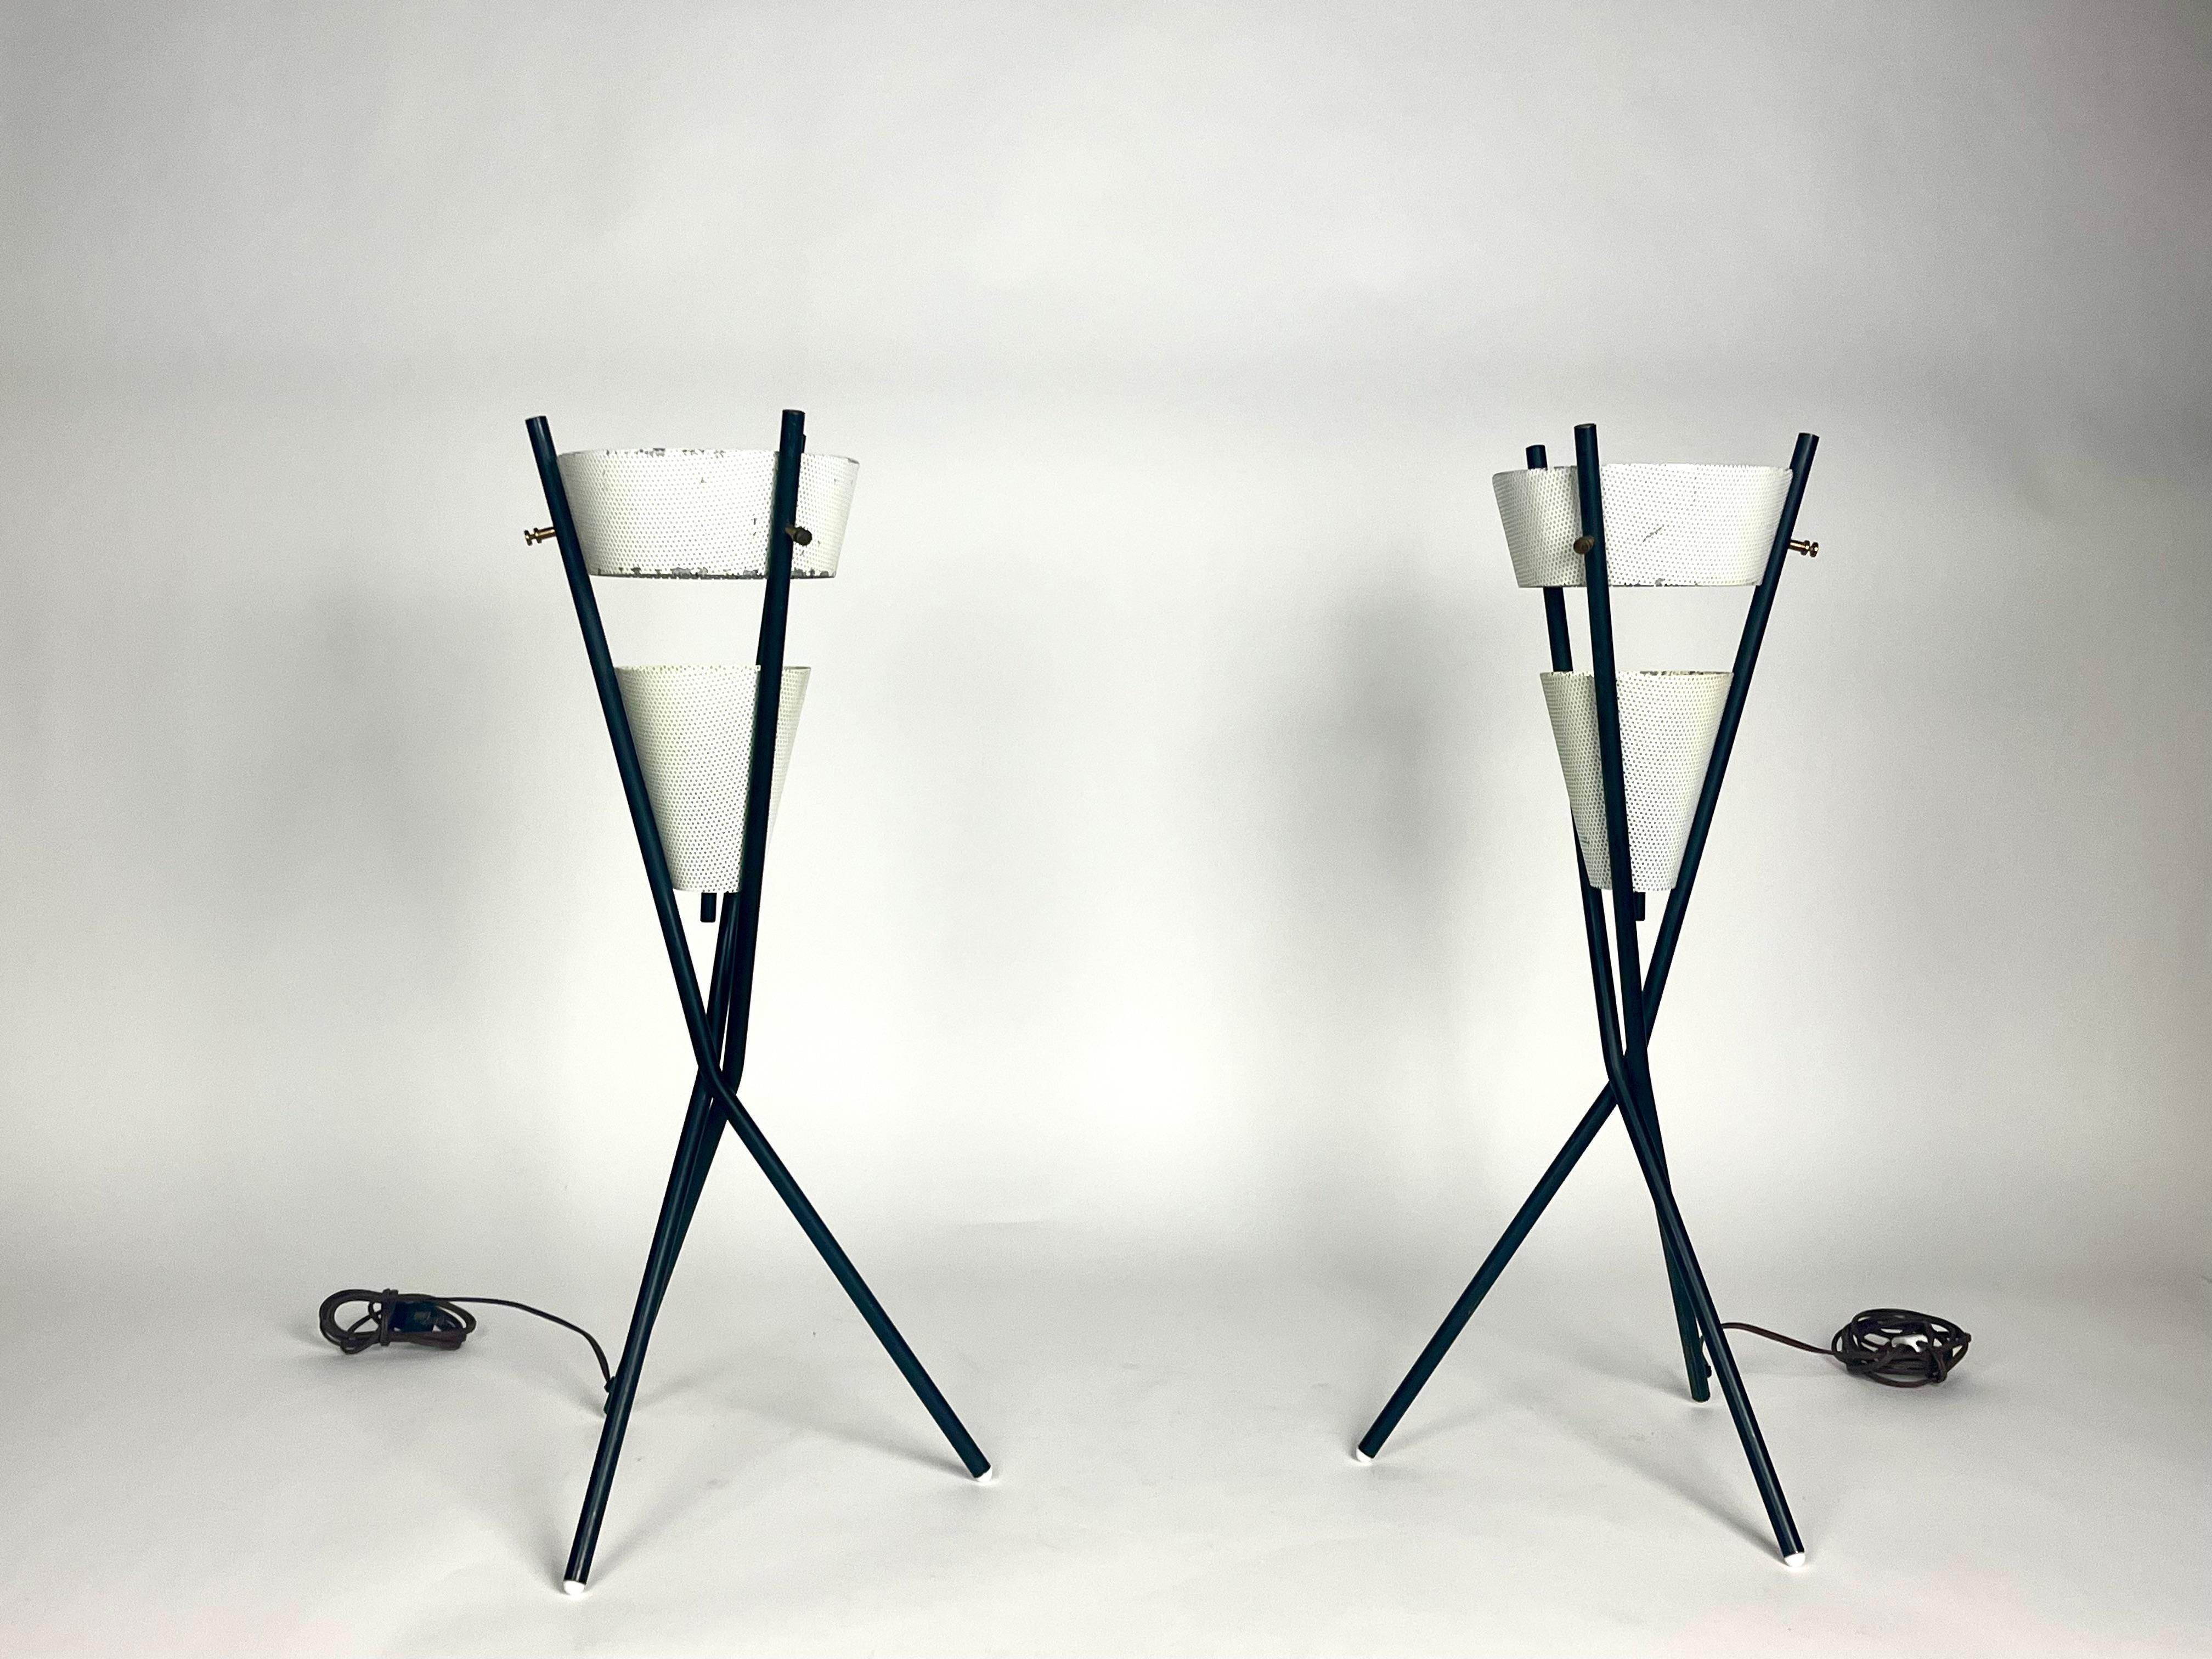 Pair of 1950s Gerald Thurston Tripod table lamp space age Modern Lightolier
Measures: 26 1/2